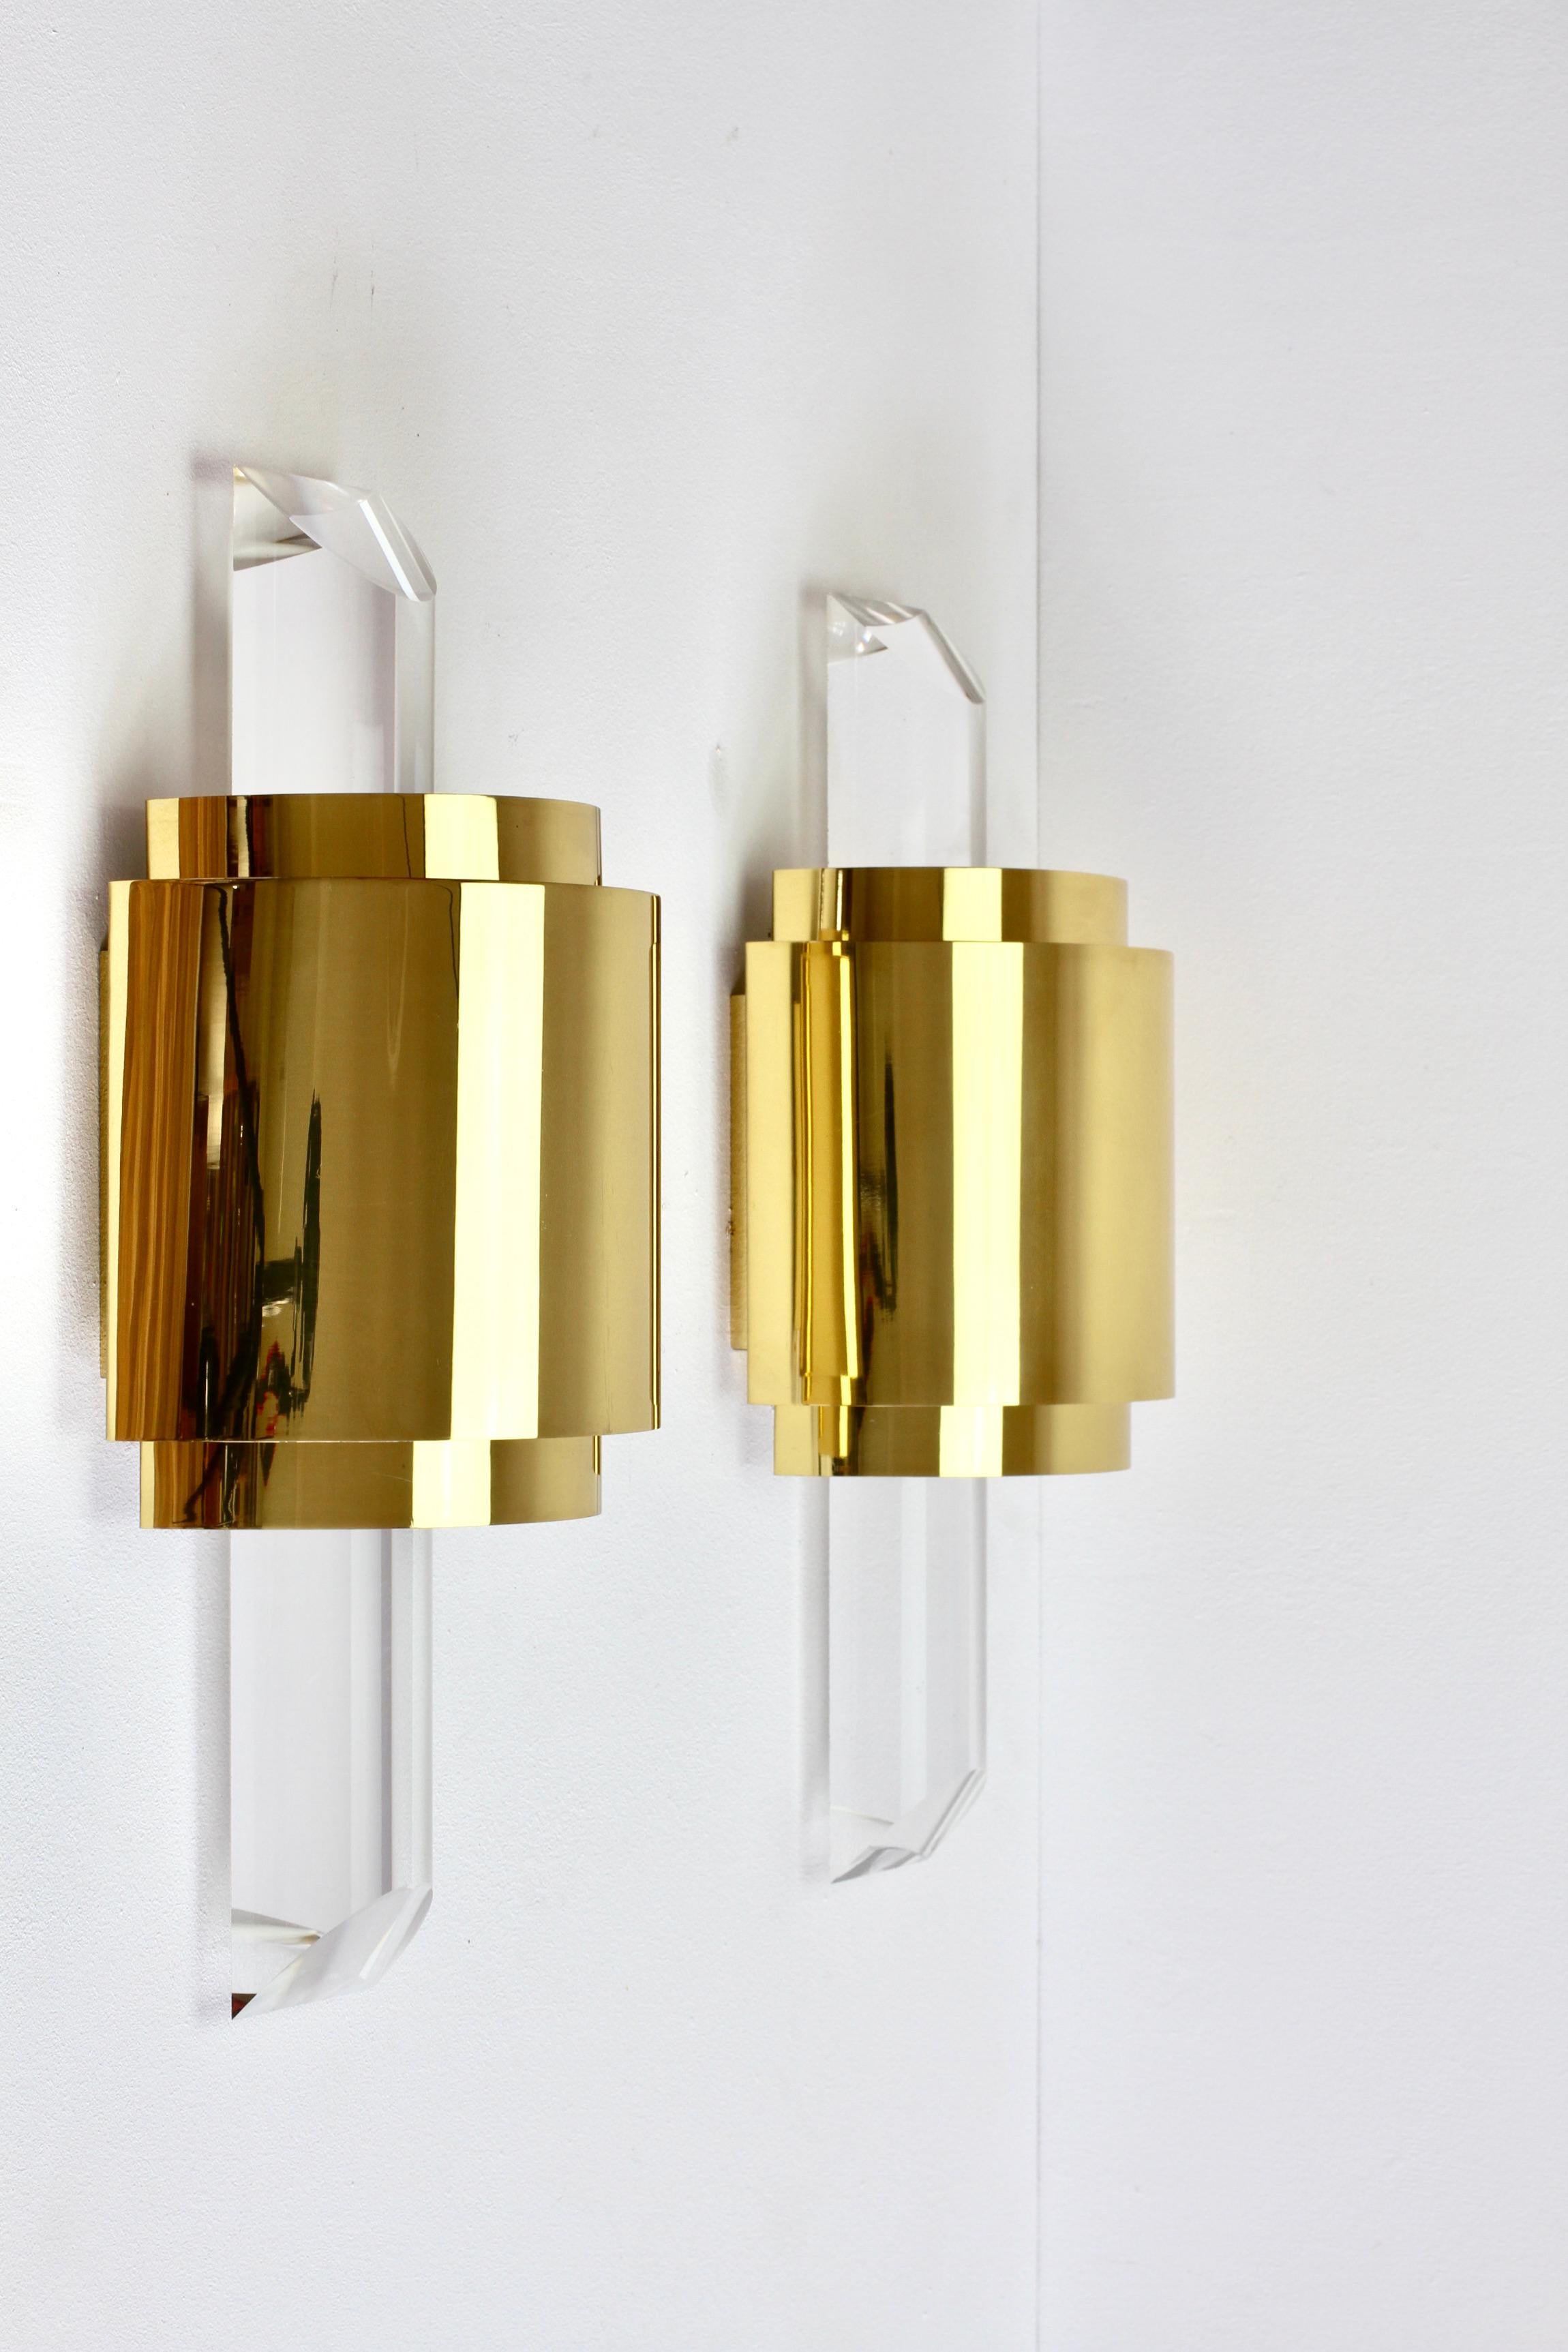 Hollywood Regency style pair of large, oversized pair of cut / angled acrylic / lucite wall-mounted lamps, lights or sconces in the style of Karl Springer and made in the latter part of the mid 20th century circa 1975 -1985. These illuminate